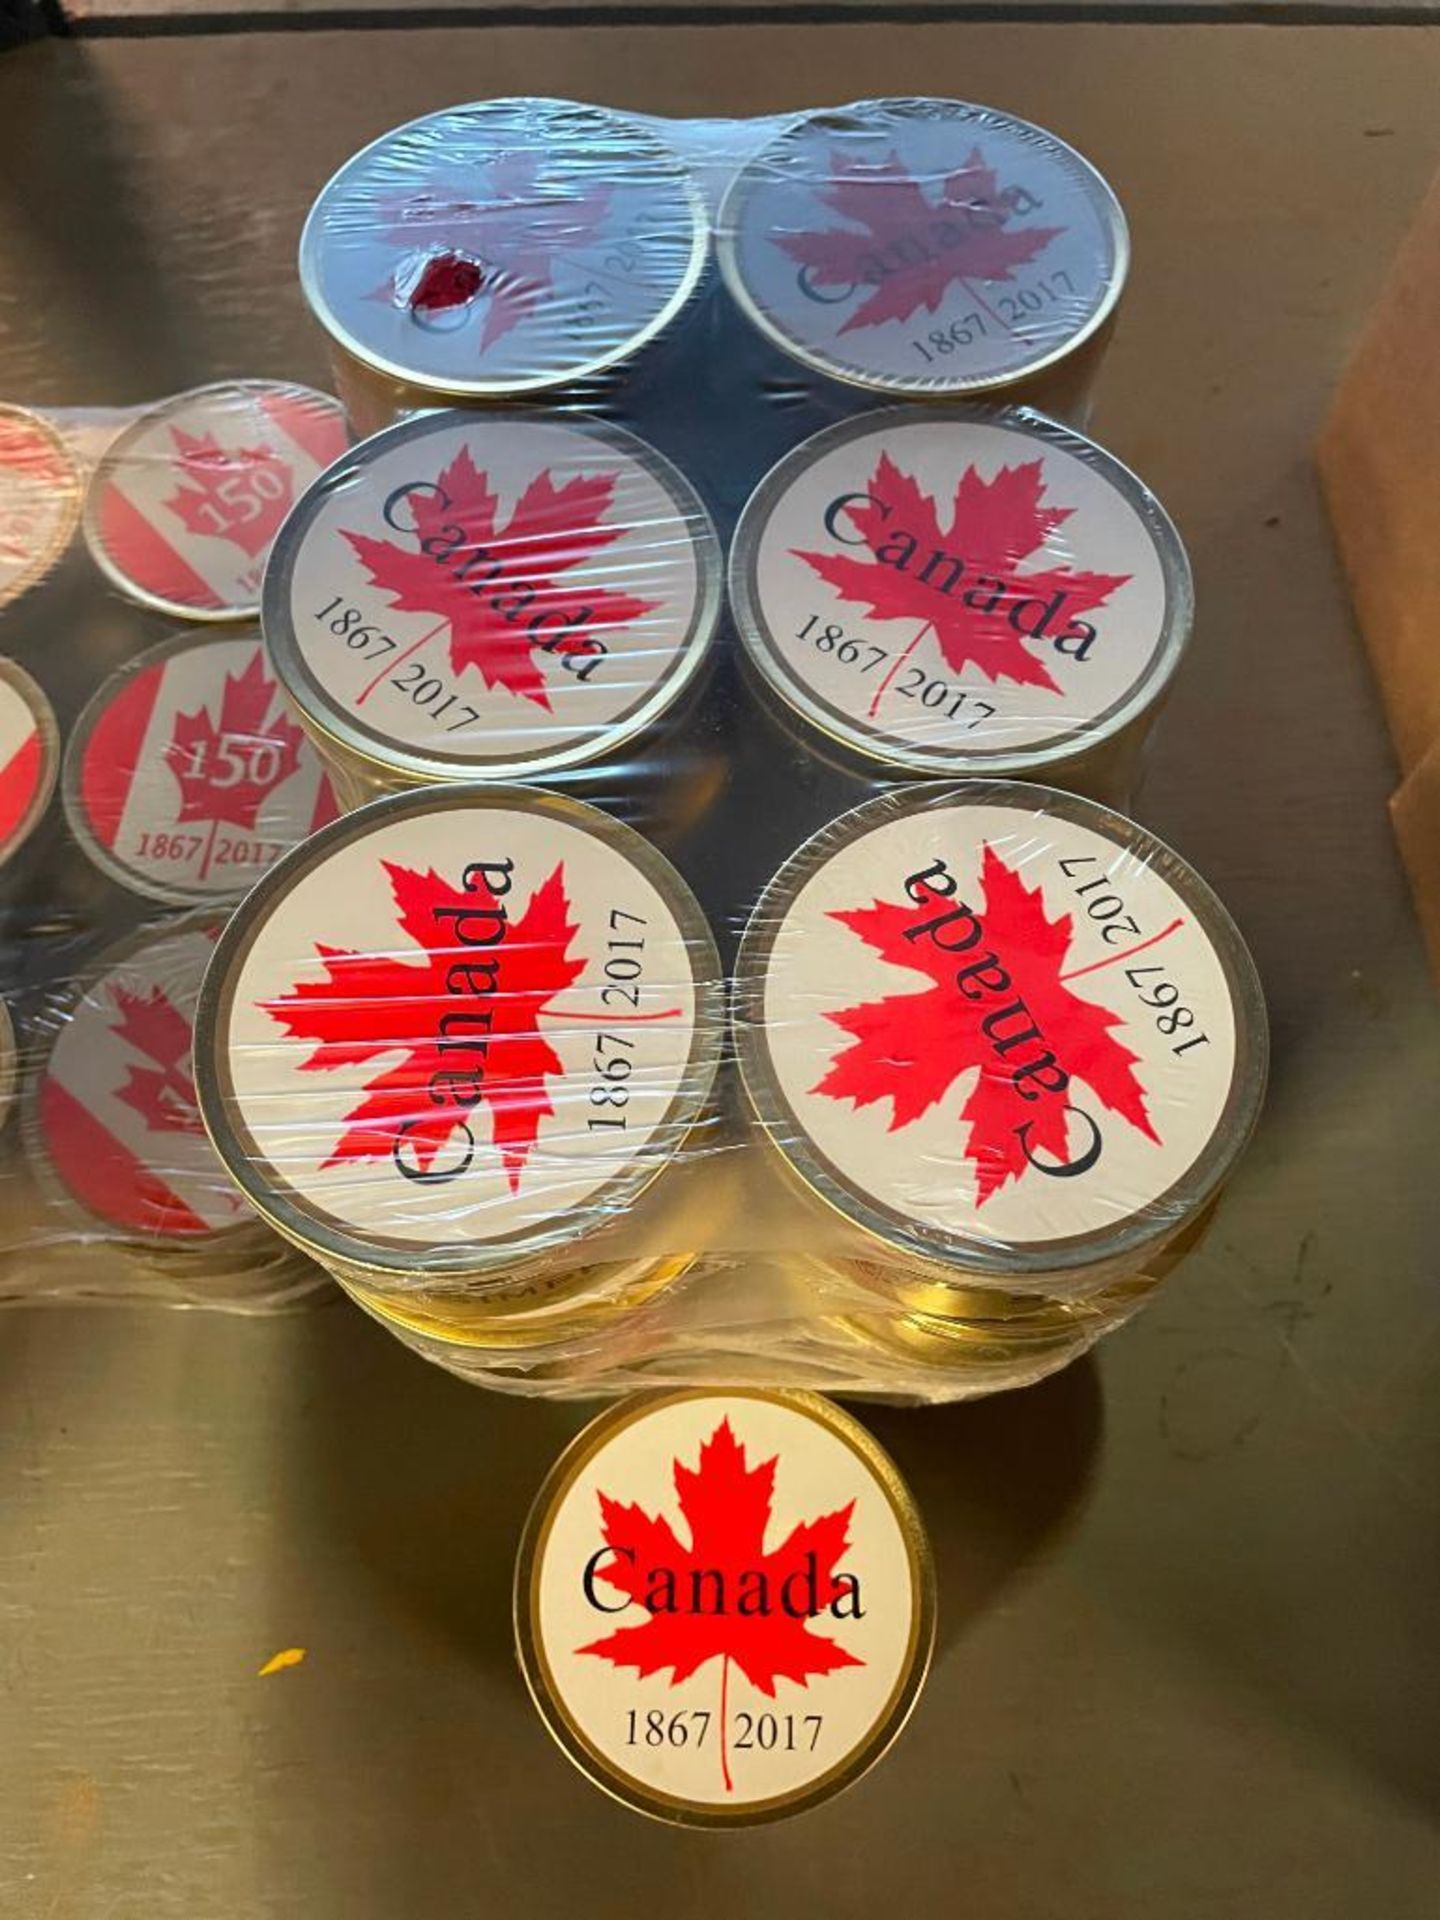 (42) TINS OF SIMPKINS TRAVEL SWEETS, CANADA 150 YEARS DROPS, 200G/TIN - Image 3 of 4